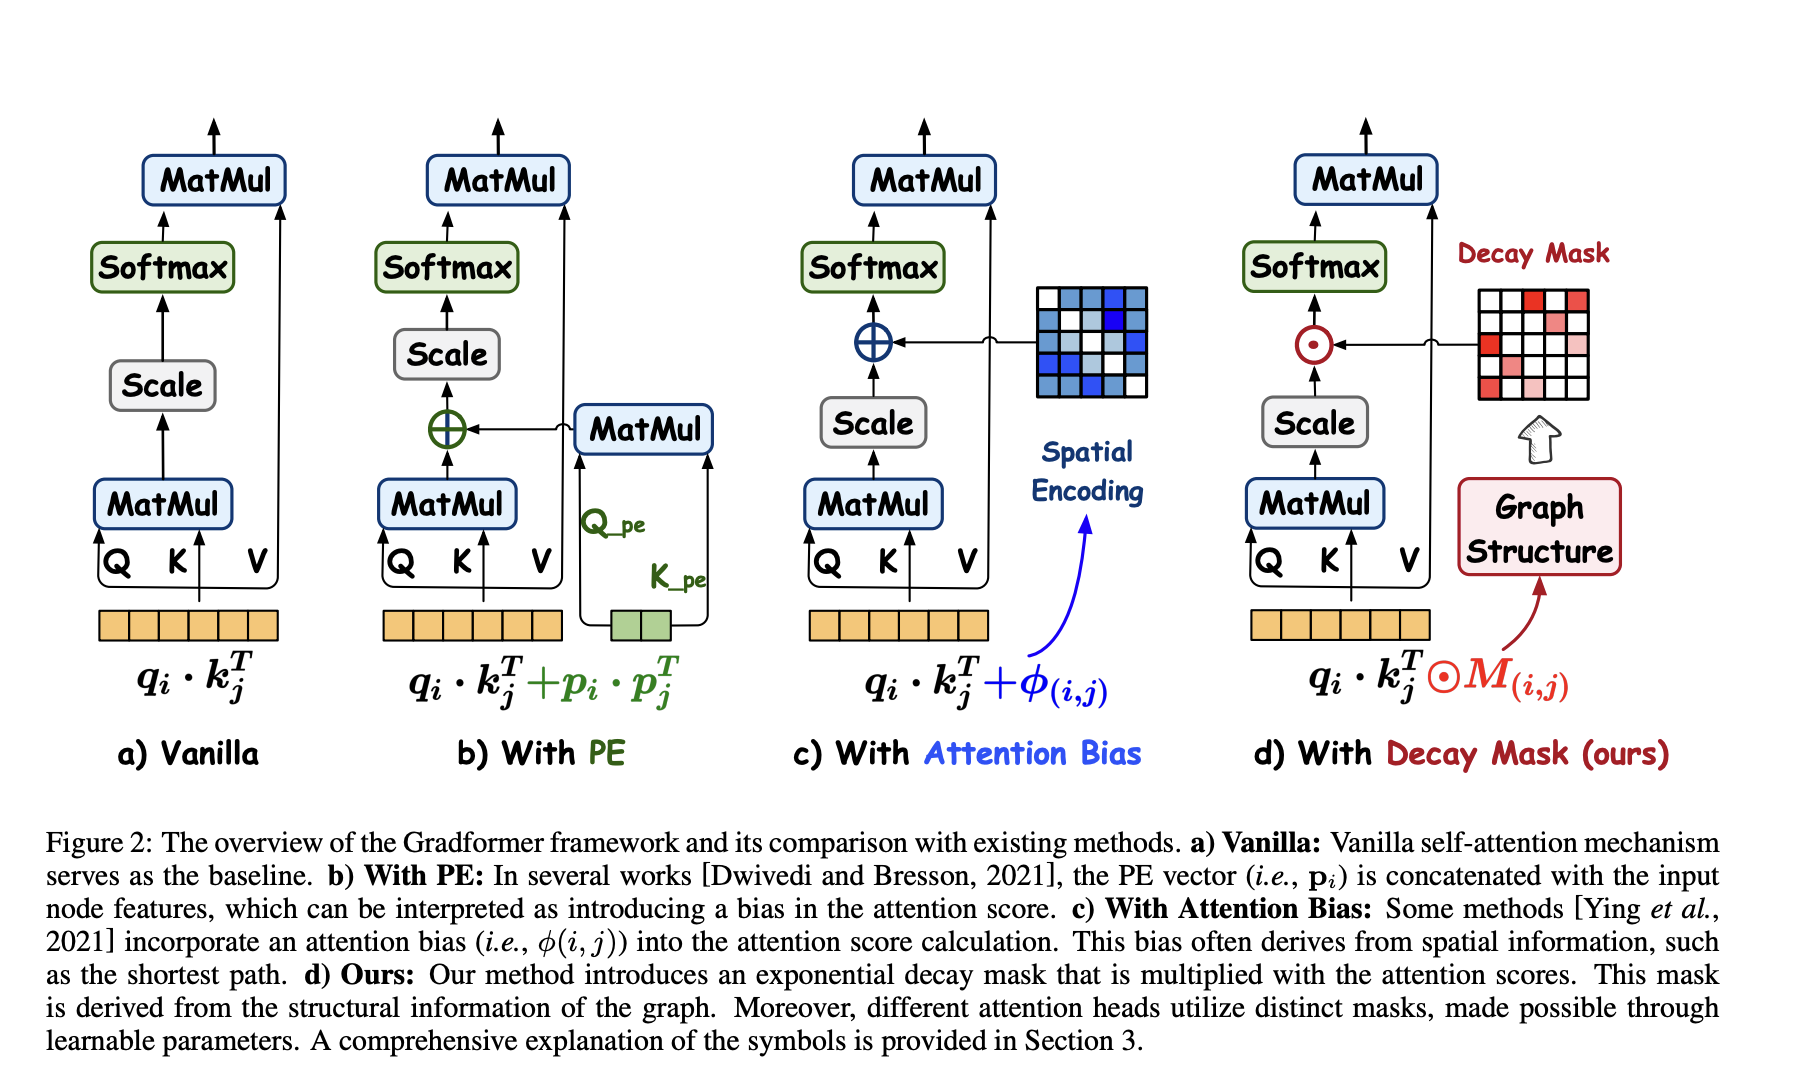  Gradformer: A Machine Learning Method that Integrates Graph Transformers (GTs) with the Intrinsic Inductive Bias by Applying an Exponential Decay Mask to the Attention Matrix